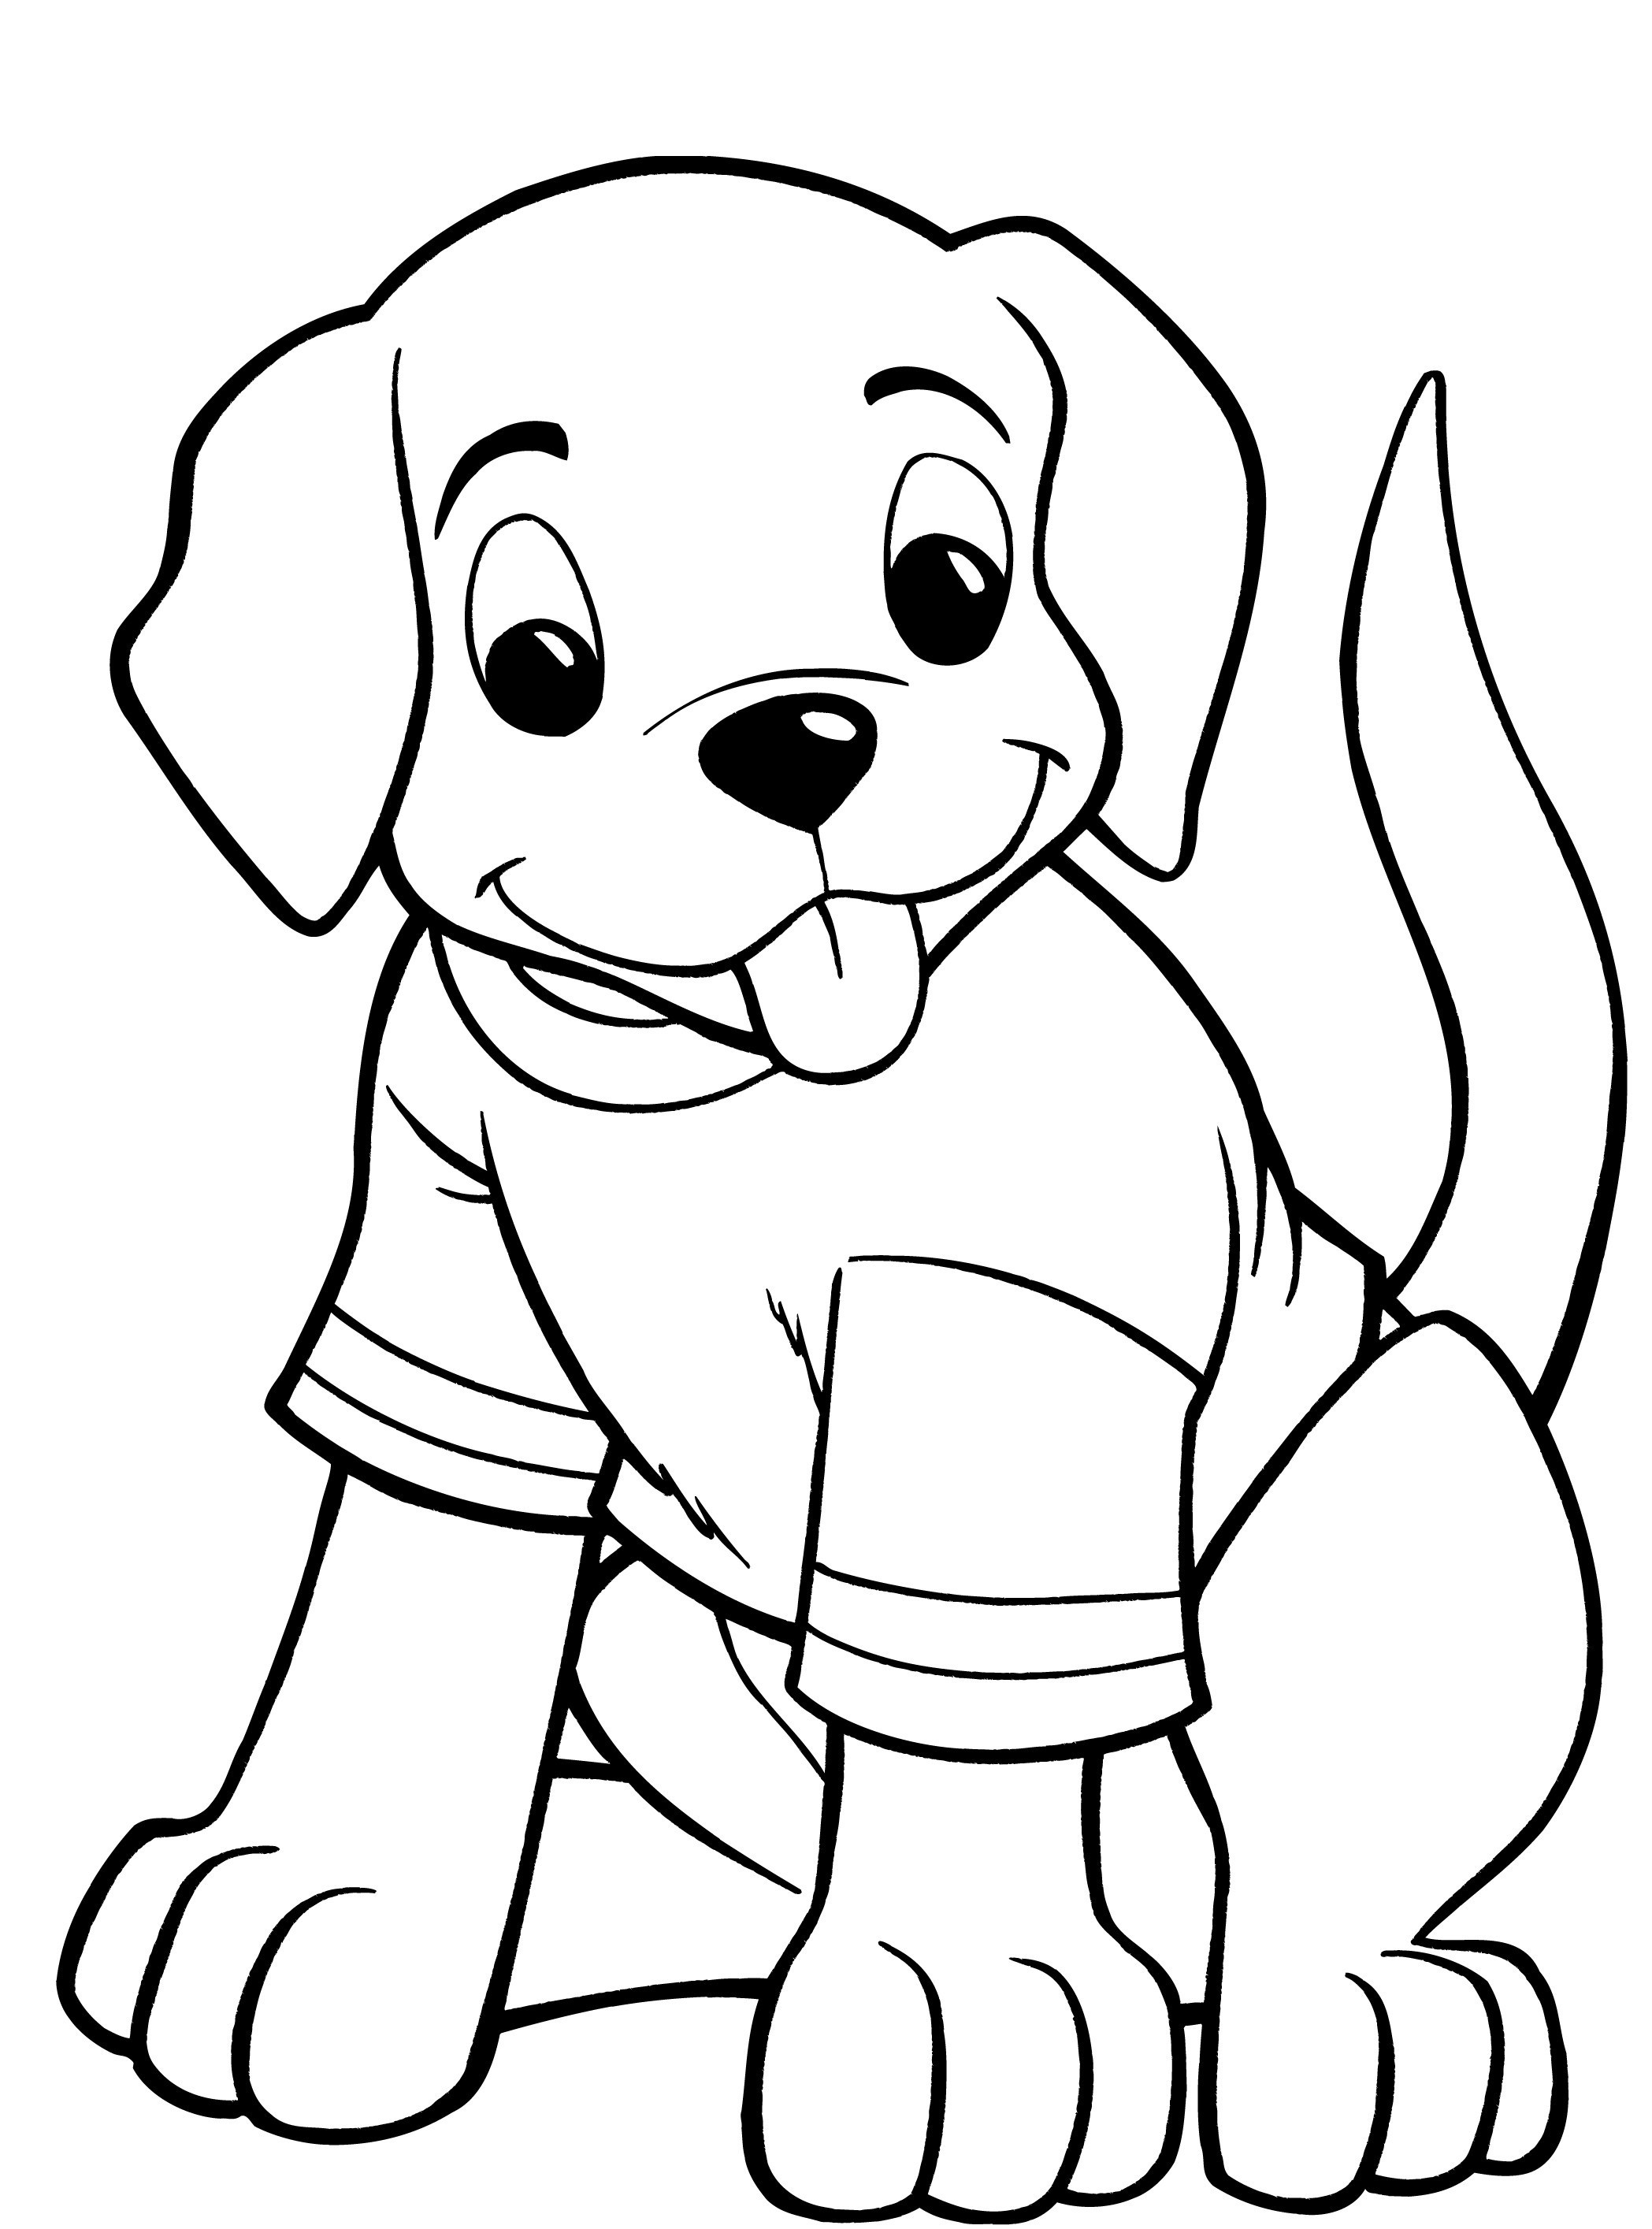 Free Printable Dog Coloring Pages
 Dog Coloring Pages For Kids Preschool and Kindergarten